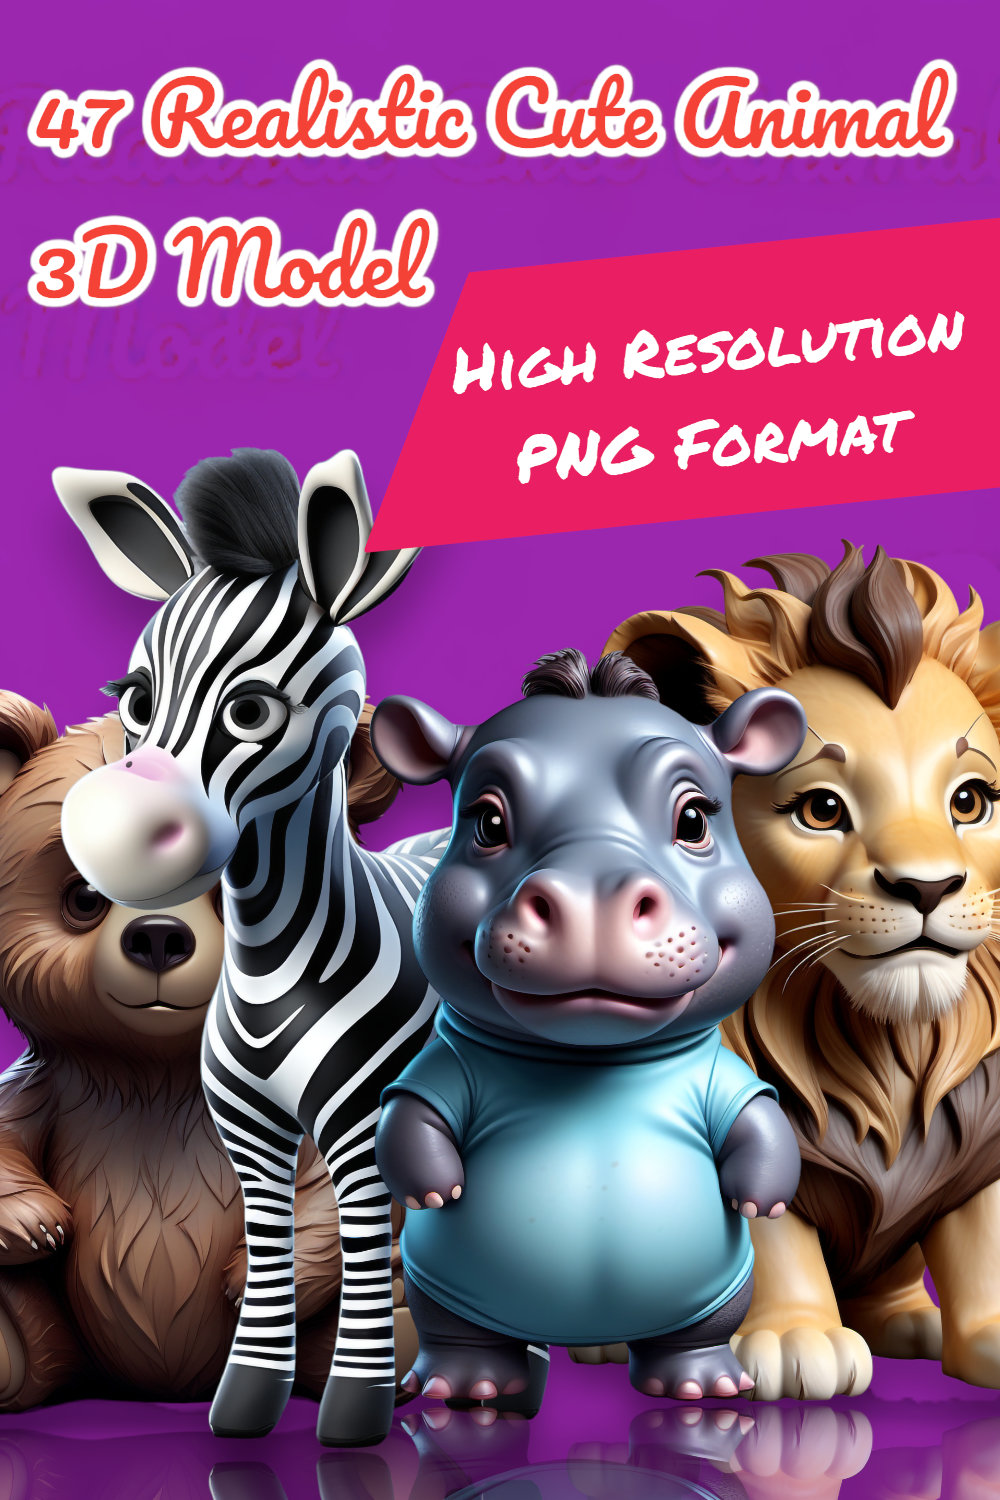 47 Realistic Cute Animal 3D Model High Resolution pinterest preview image.